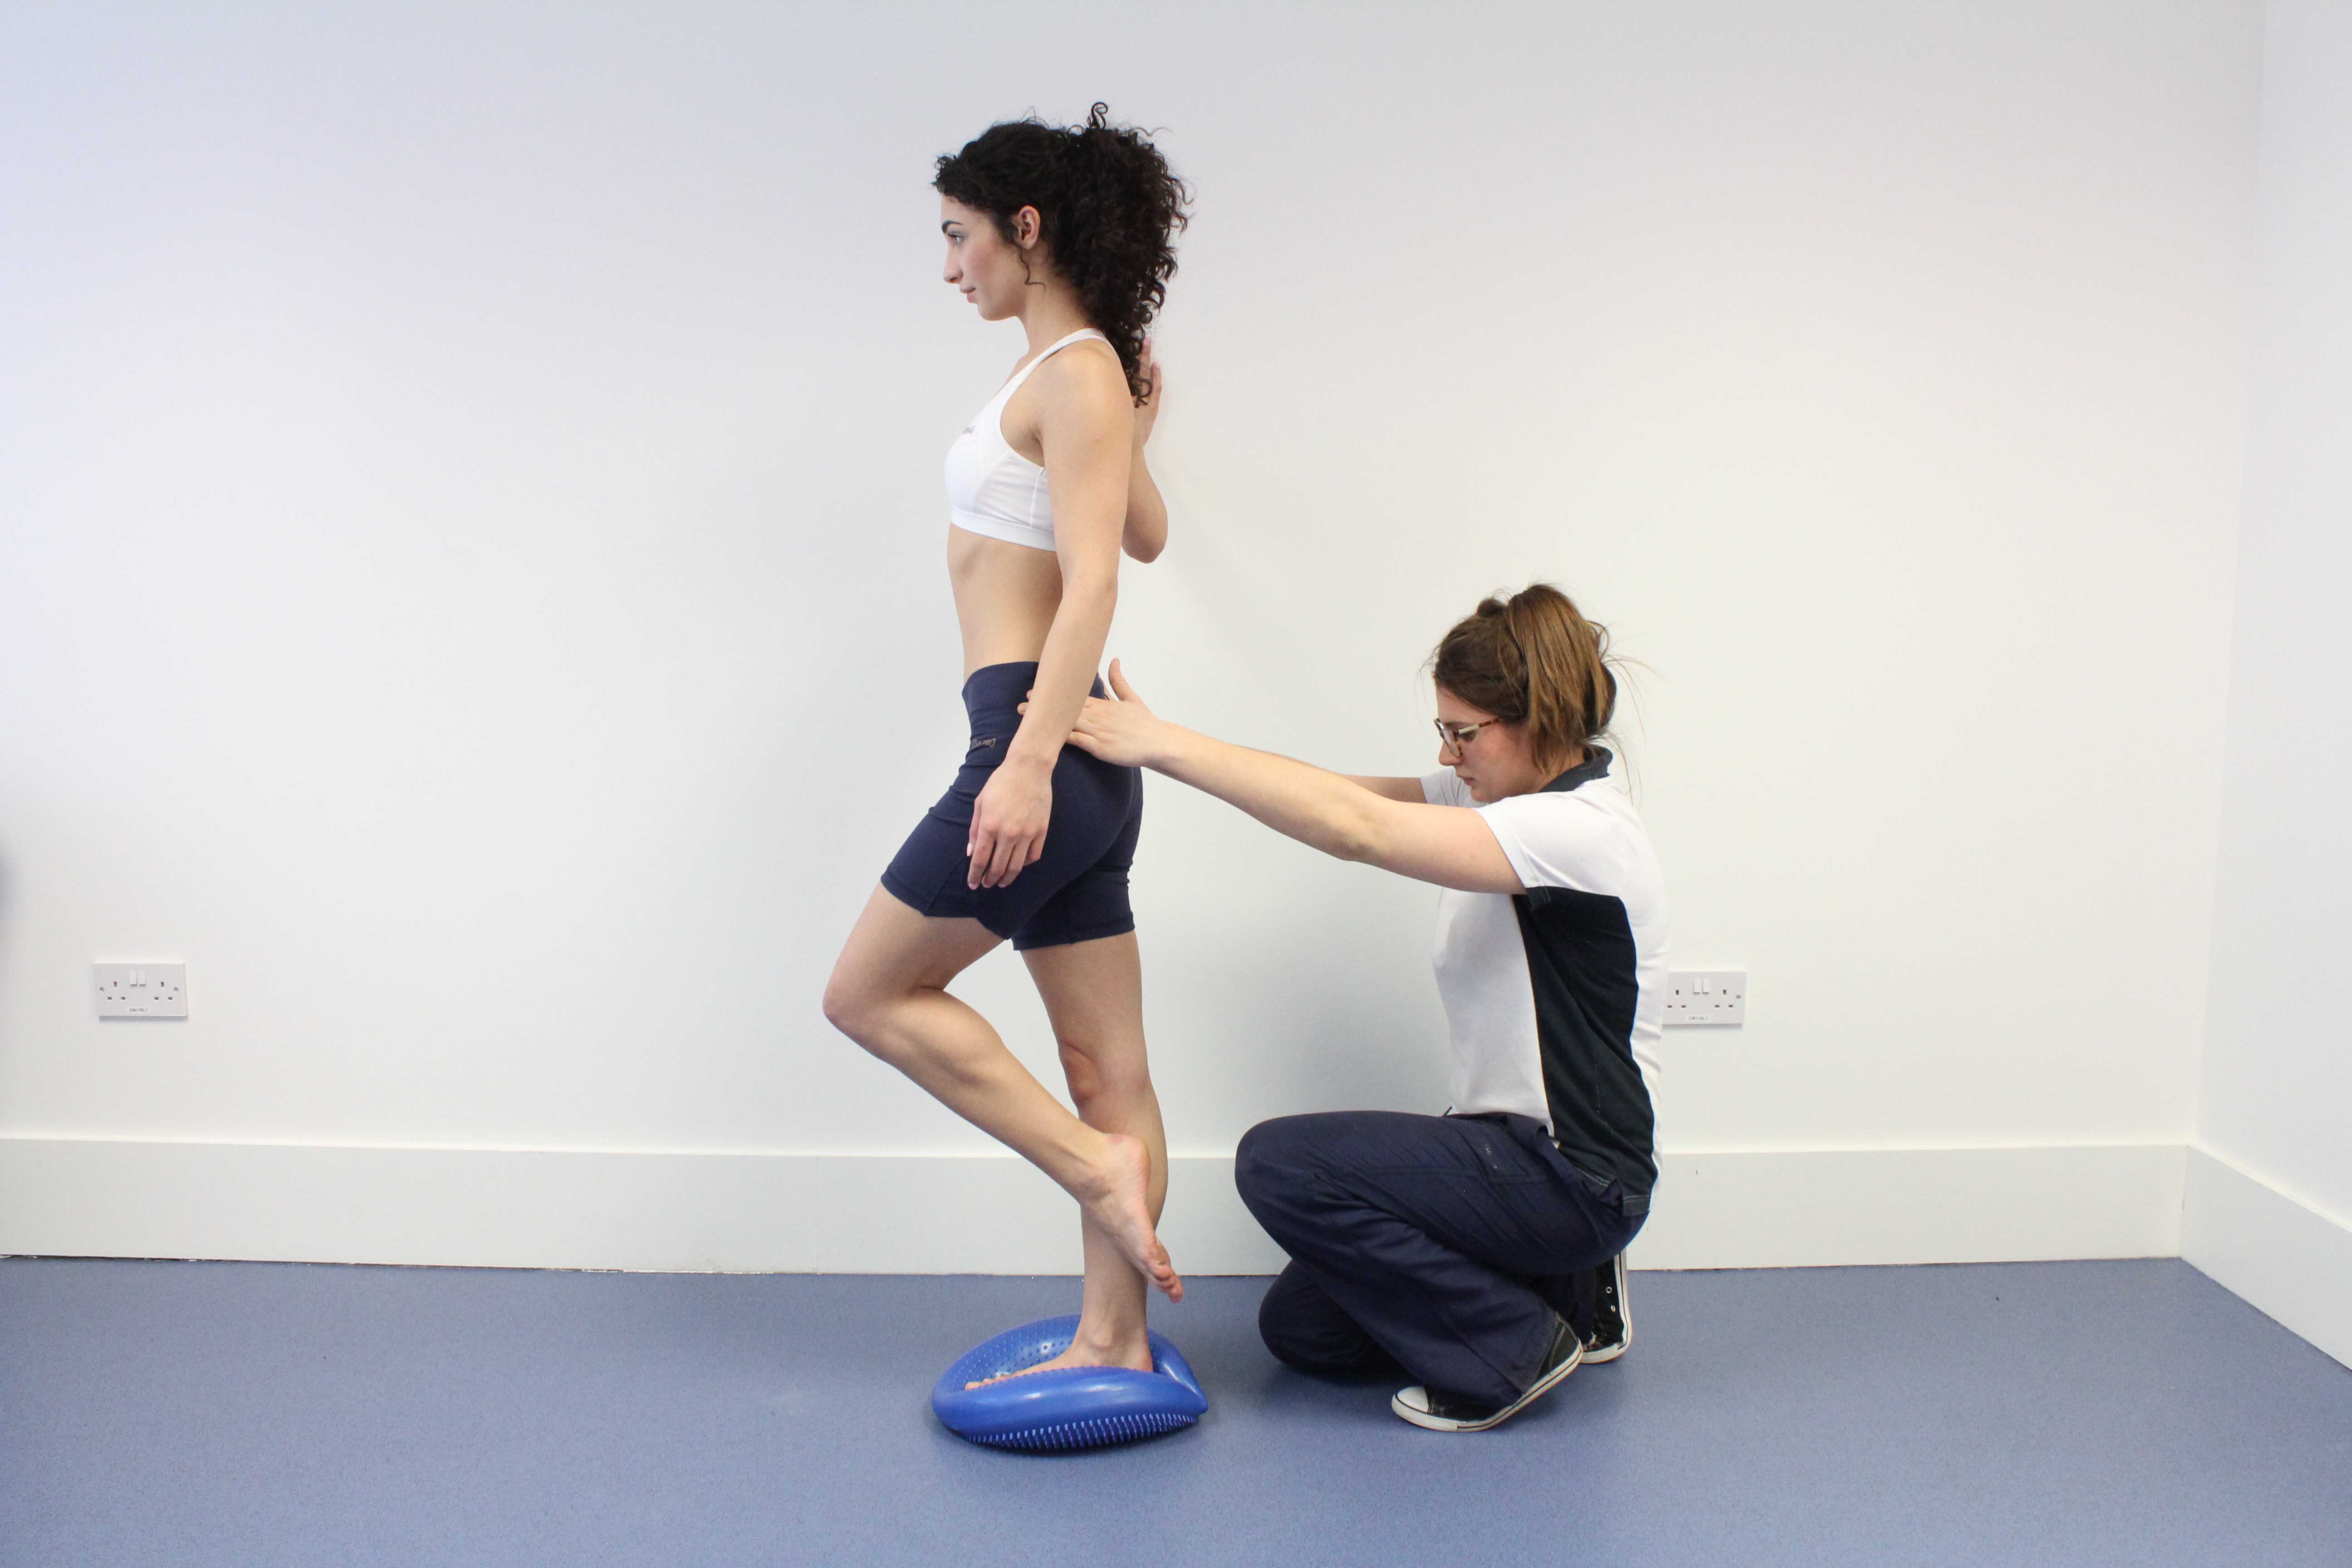 Balance Exercises Prevent Ankle Sprains - FIT AS A PHYSIO